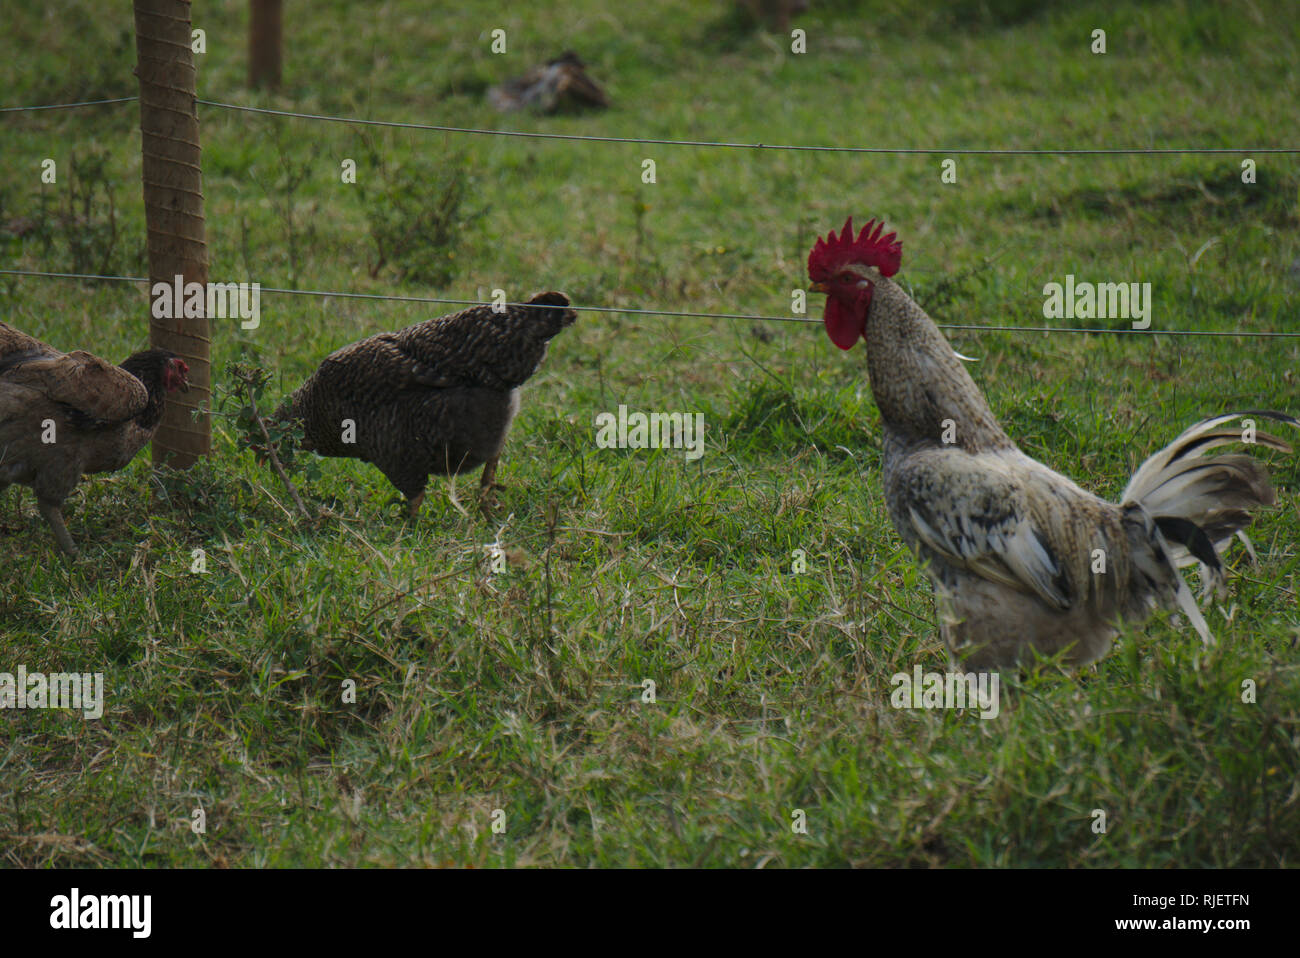 Cock and chicken in a farm. Stock Photo